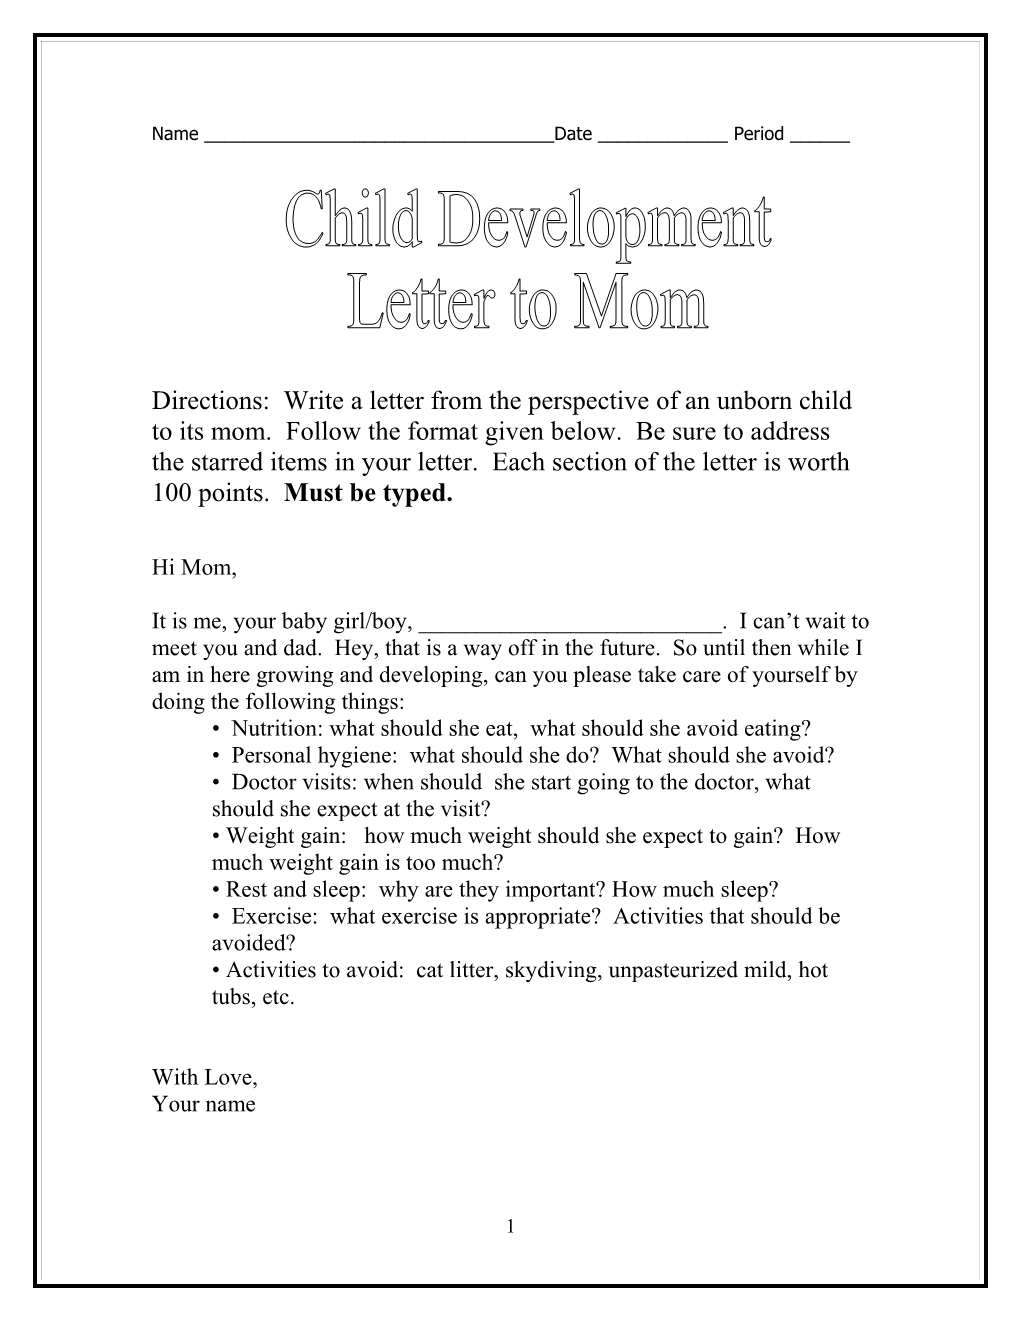 Write a Letter from the Perspective of an Unborn Child to a Mom Using the Following Format